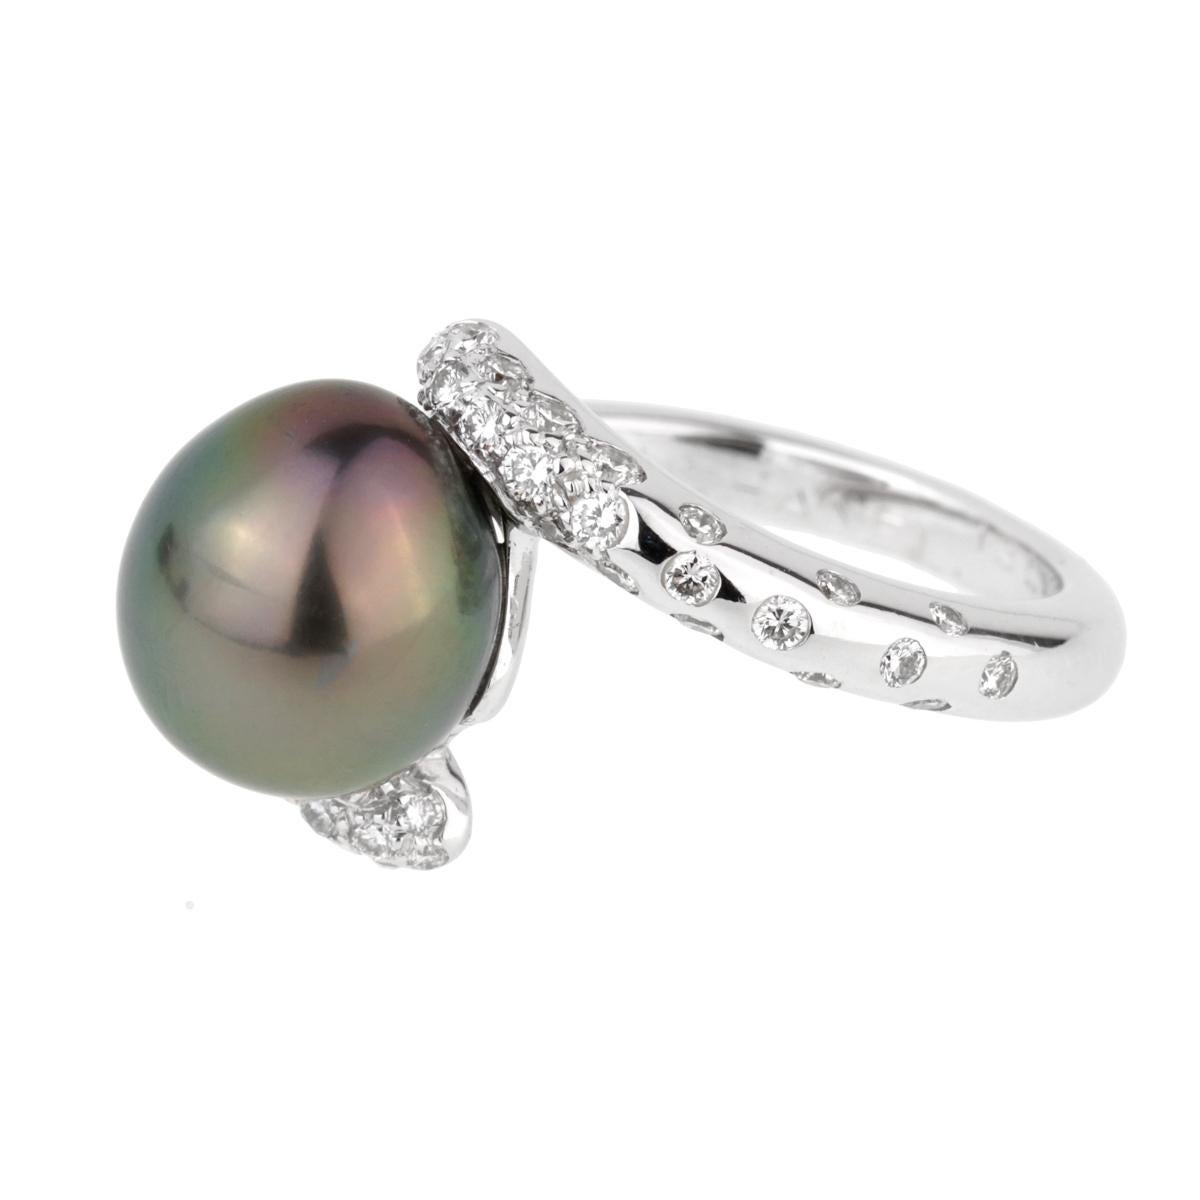 Chanel Concept Pearl Diamond White Gold Ring In Excellent Condition For Sale In Feasterville, PA